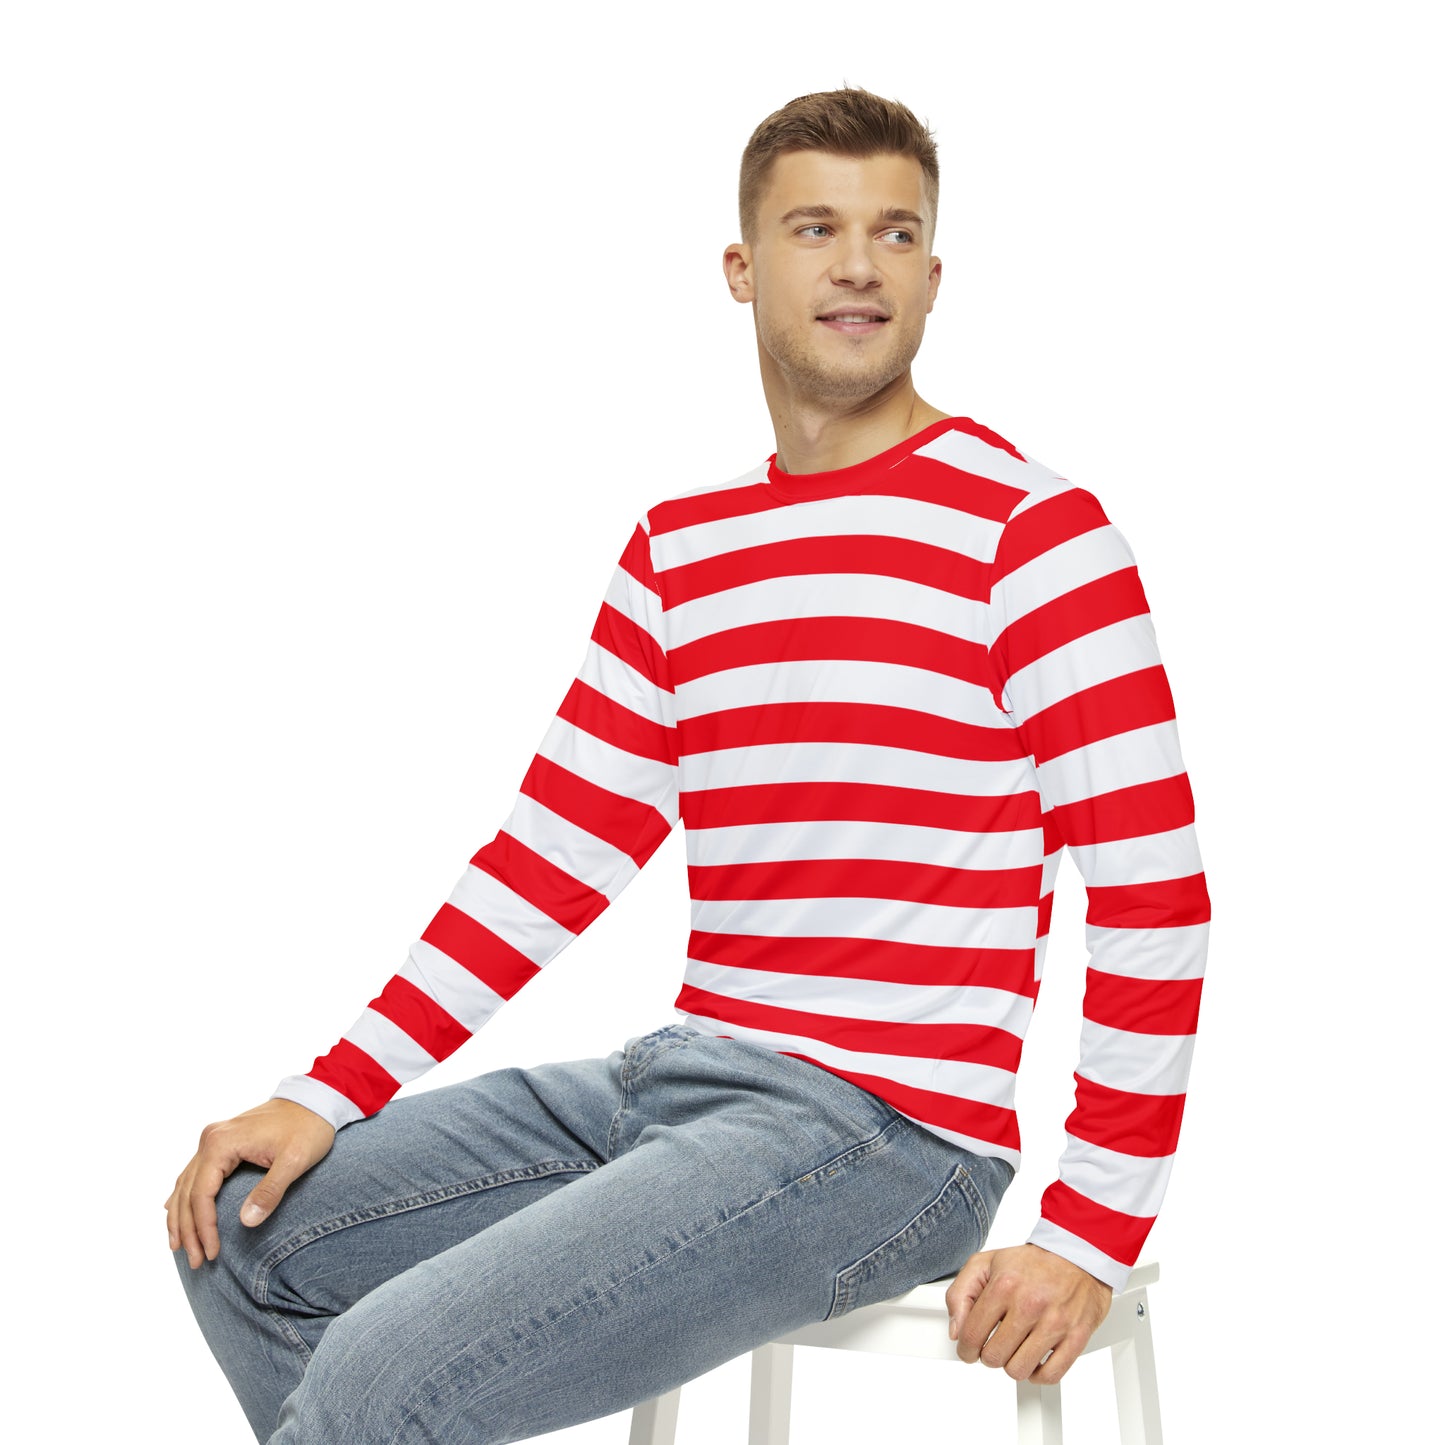 Red and White Striped Men Long Sleeve Tshirt, Unisex Women Designer Graphic Aesthetic Printed Crew Neck Shirt Tee Plus Size